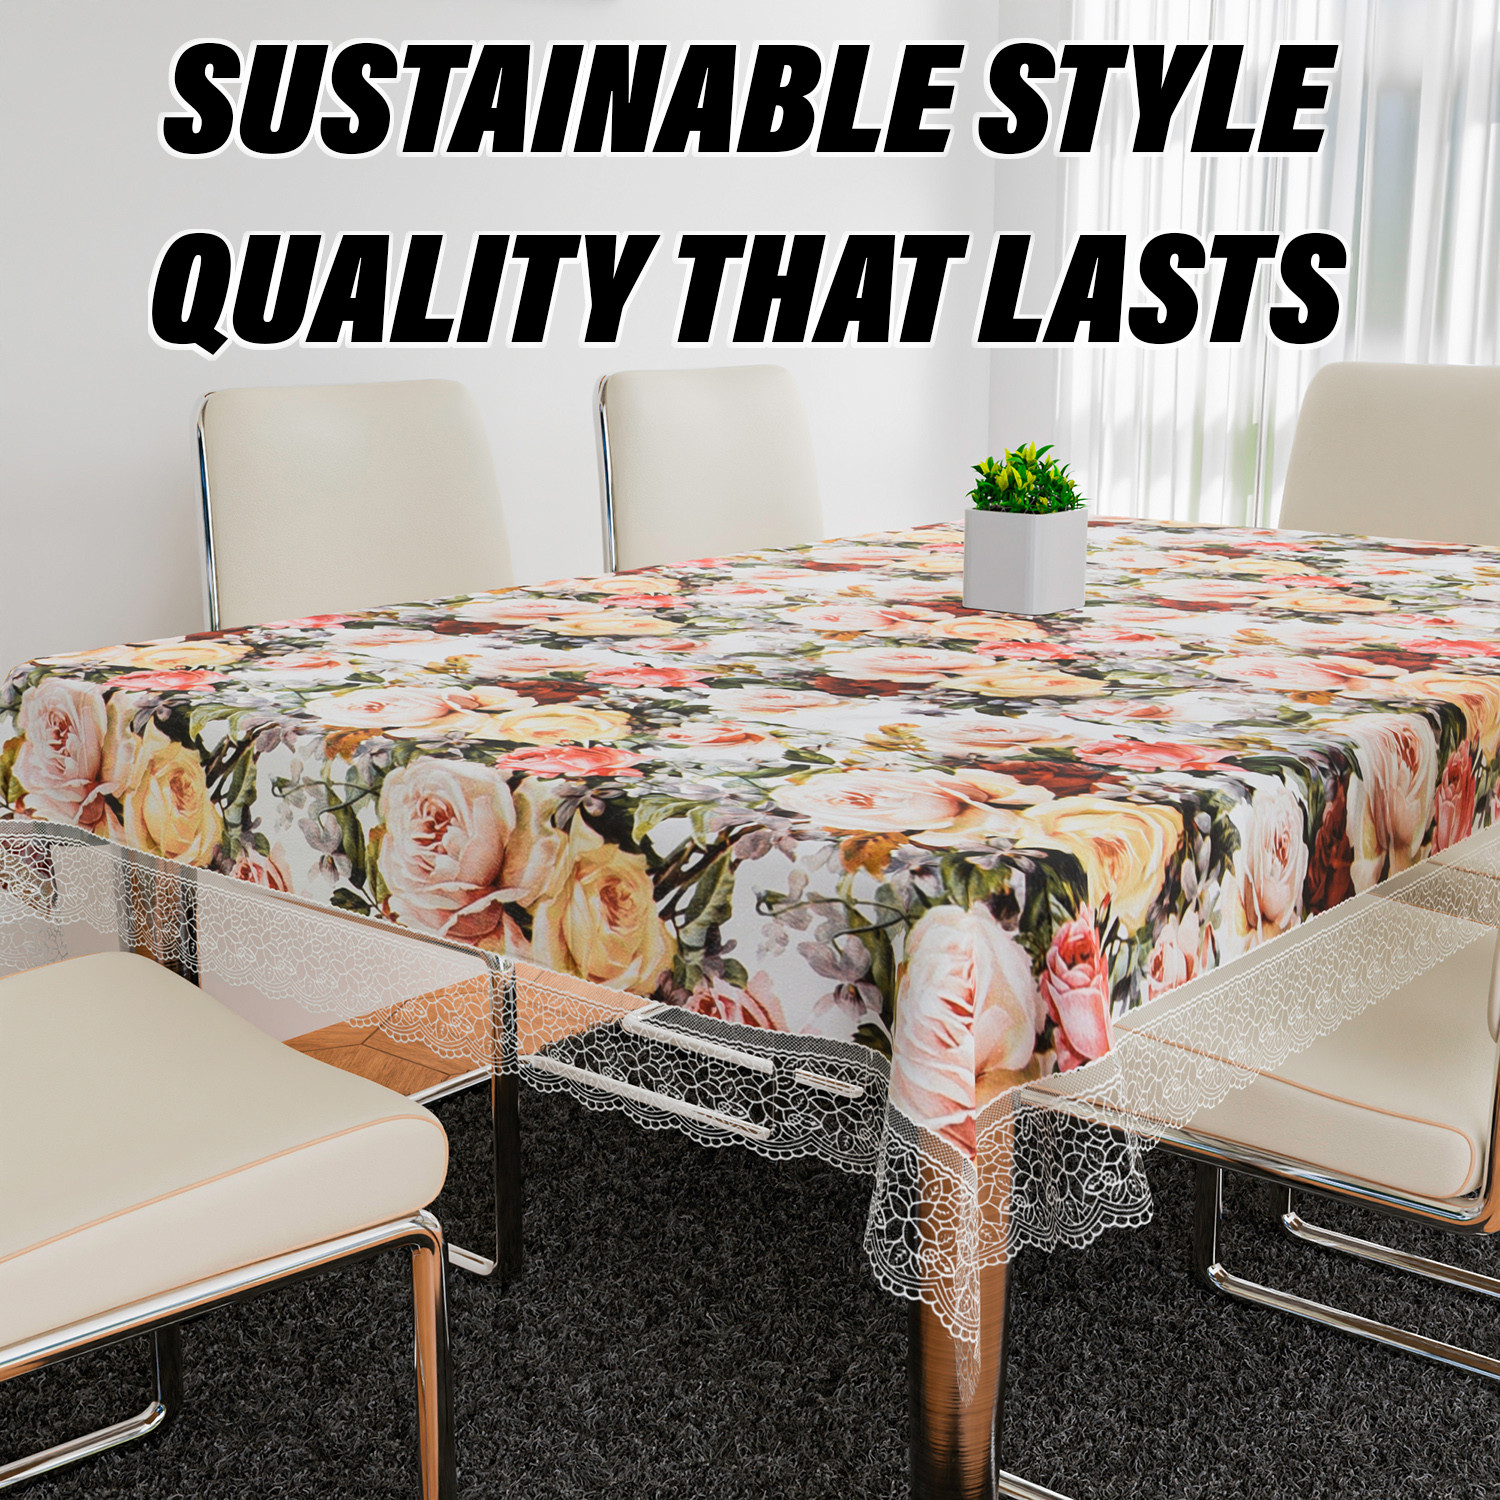 Kuber Industries Dining Table Cover | PVC Table Cloth Cover | 6 Seater Table Cloth | Rose Table Cover | Table Protector | Table Cover for Dining Table | 60x90 Inch | DTC | White